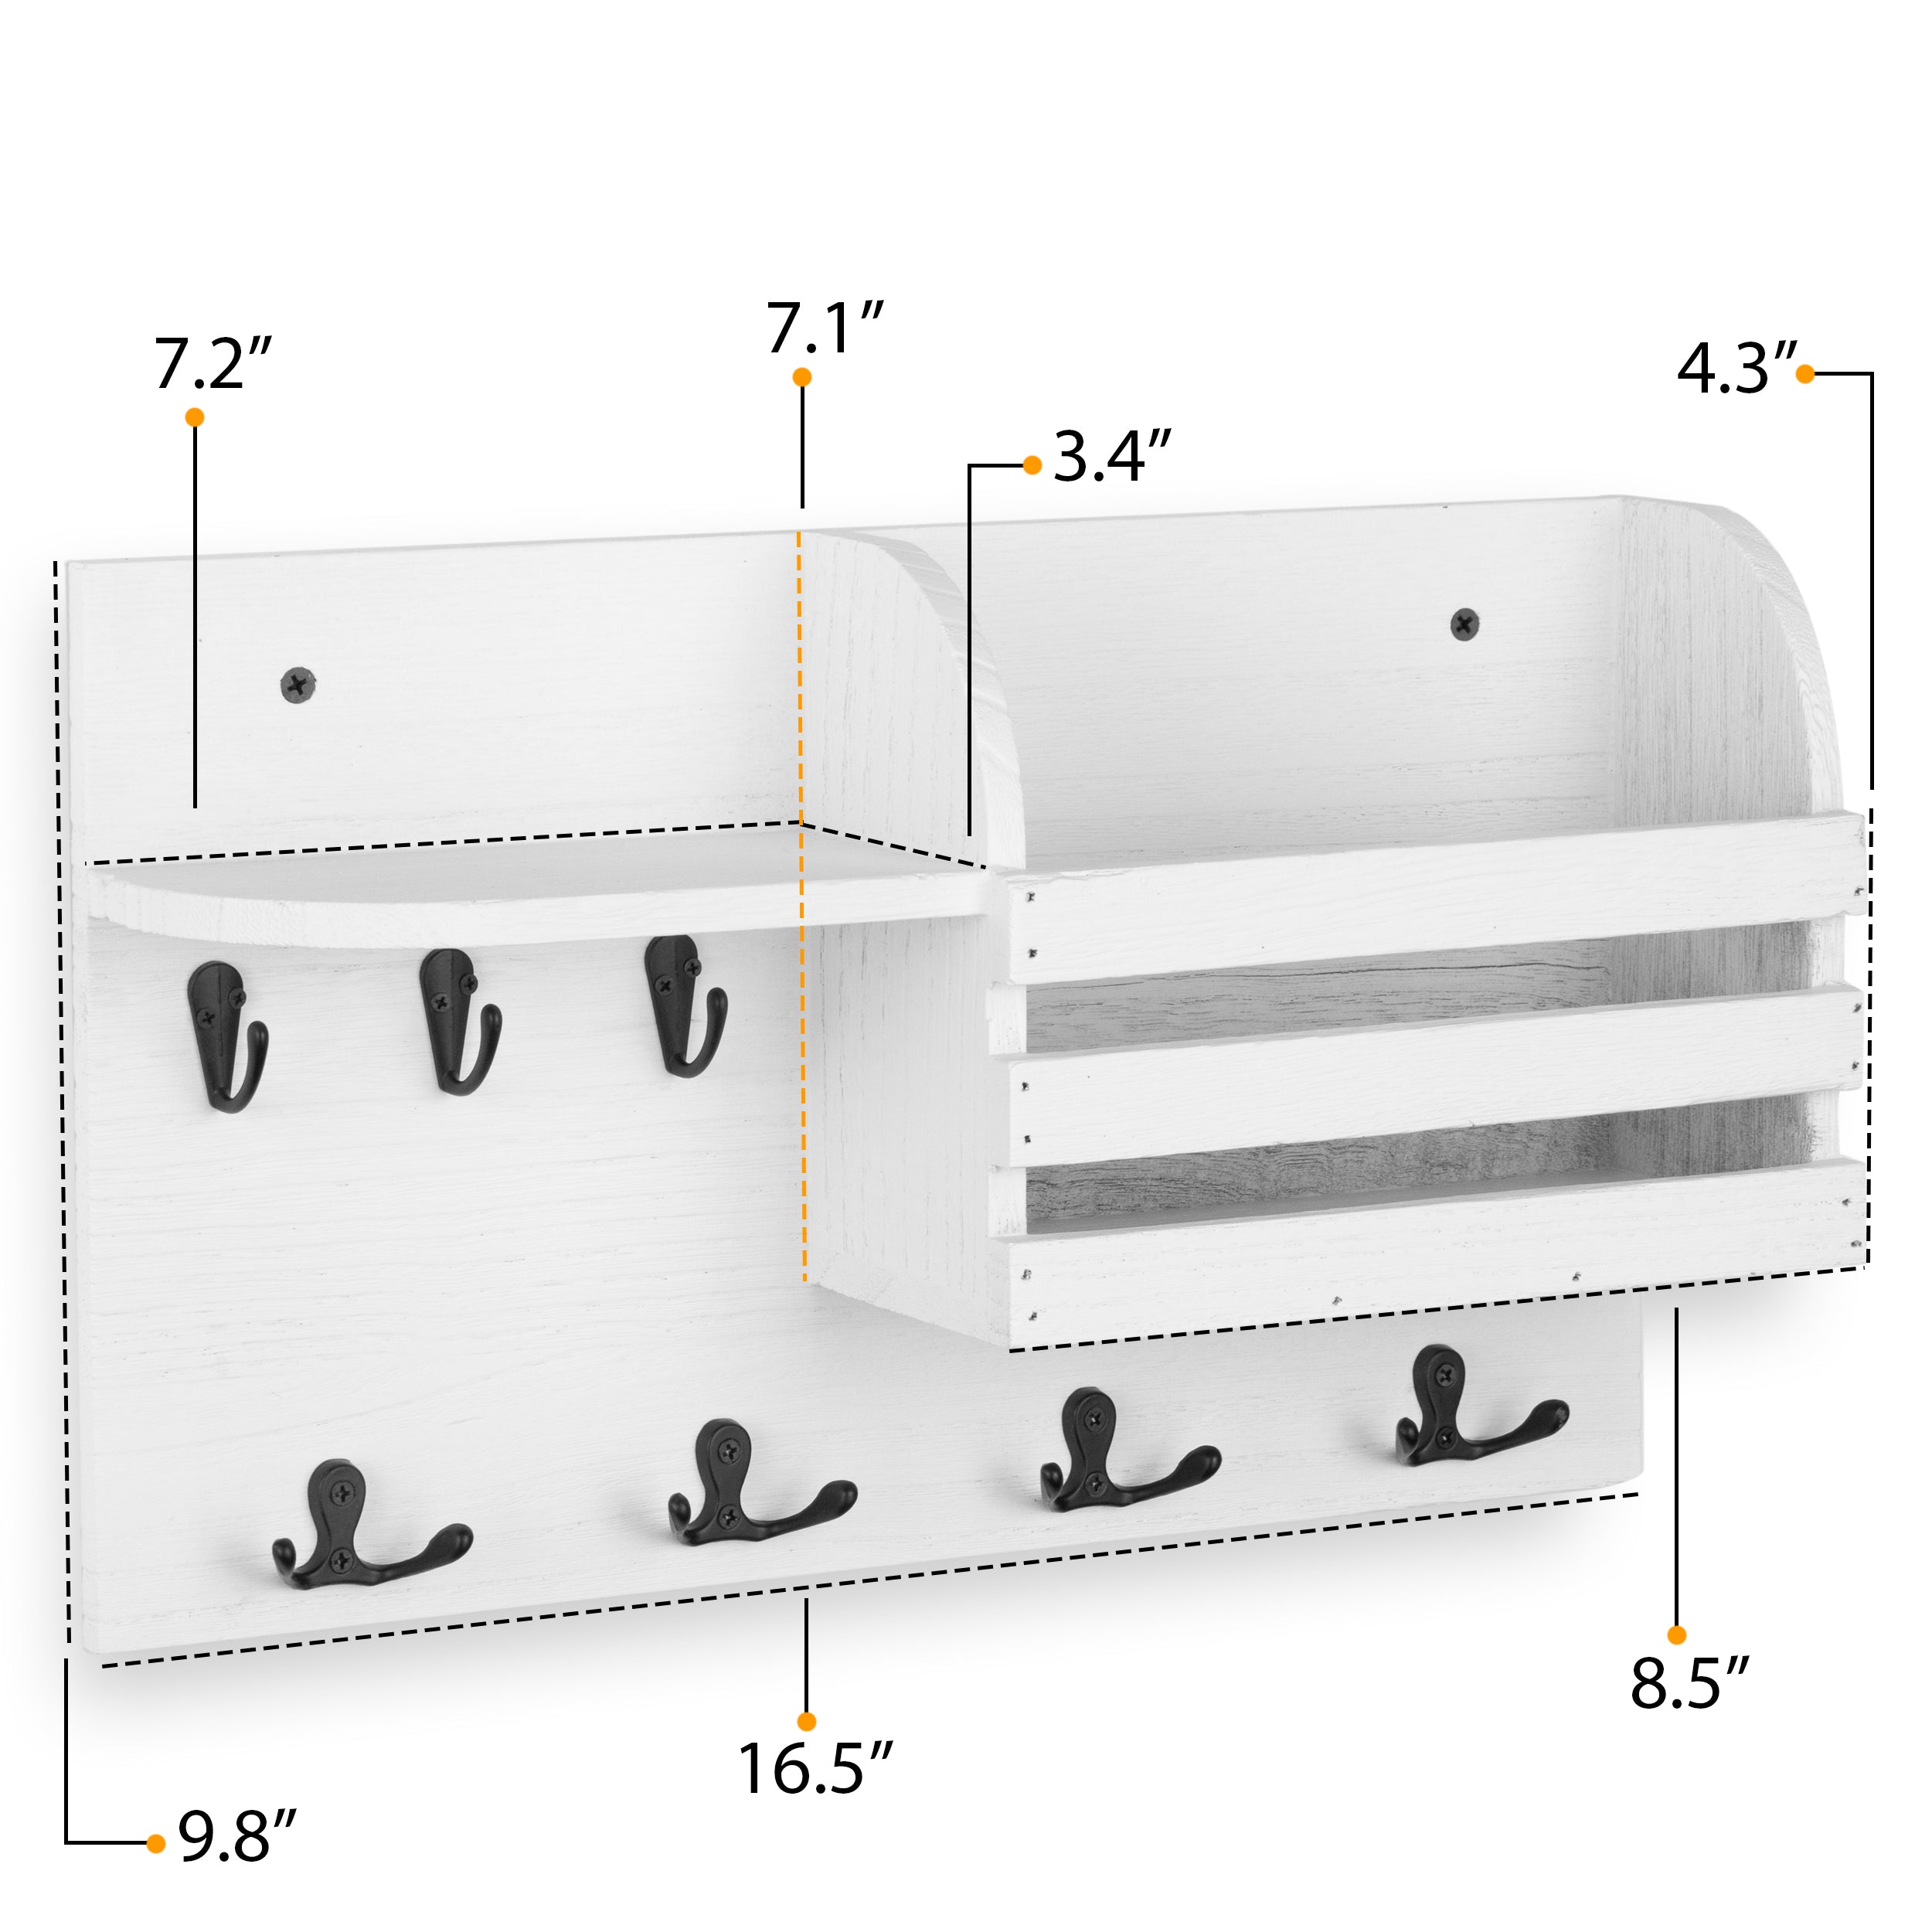 HORTA Coat Rack Entryway Organizer with Key Hooks For Hanging and Mail Holder - 16.5” Length - White - Wallniture